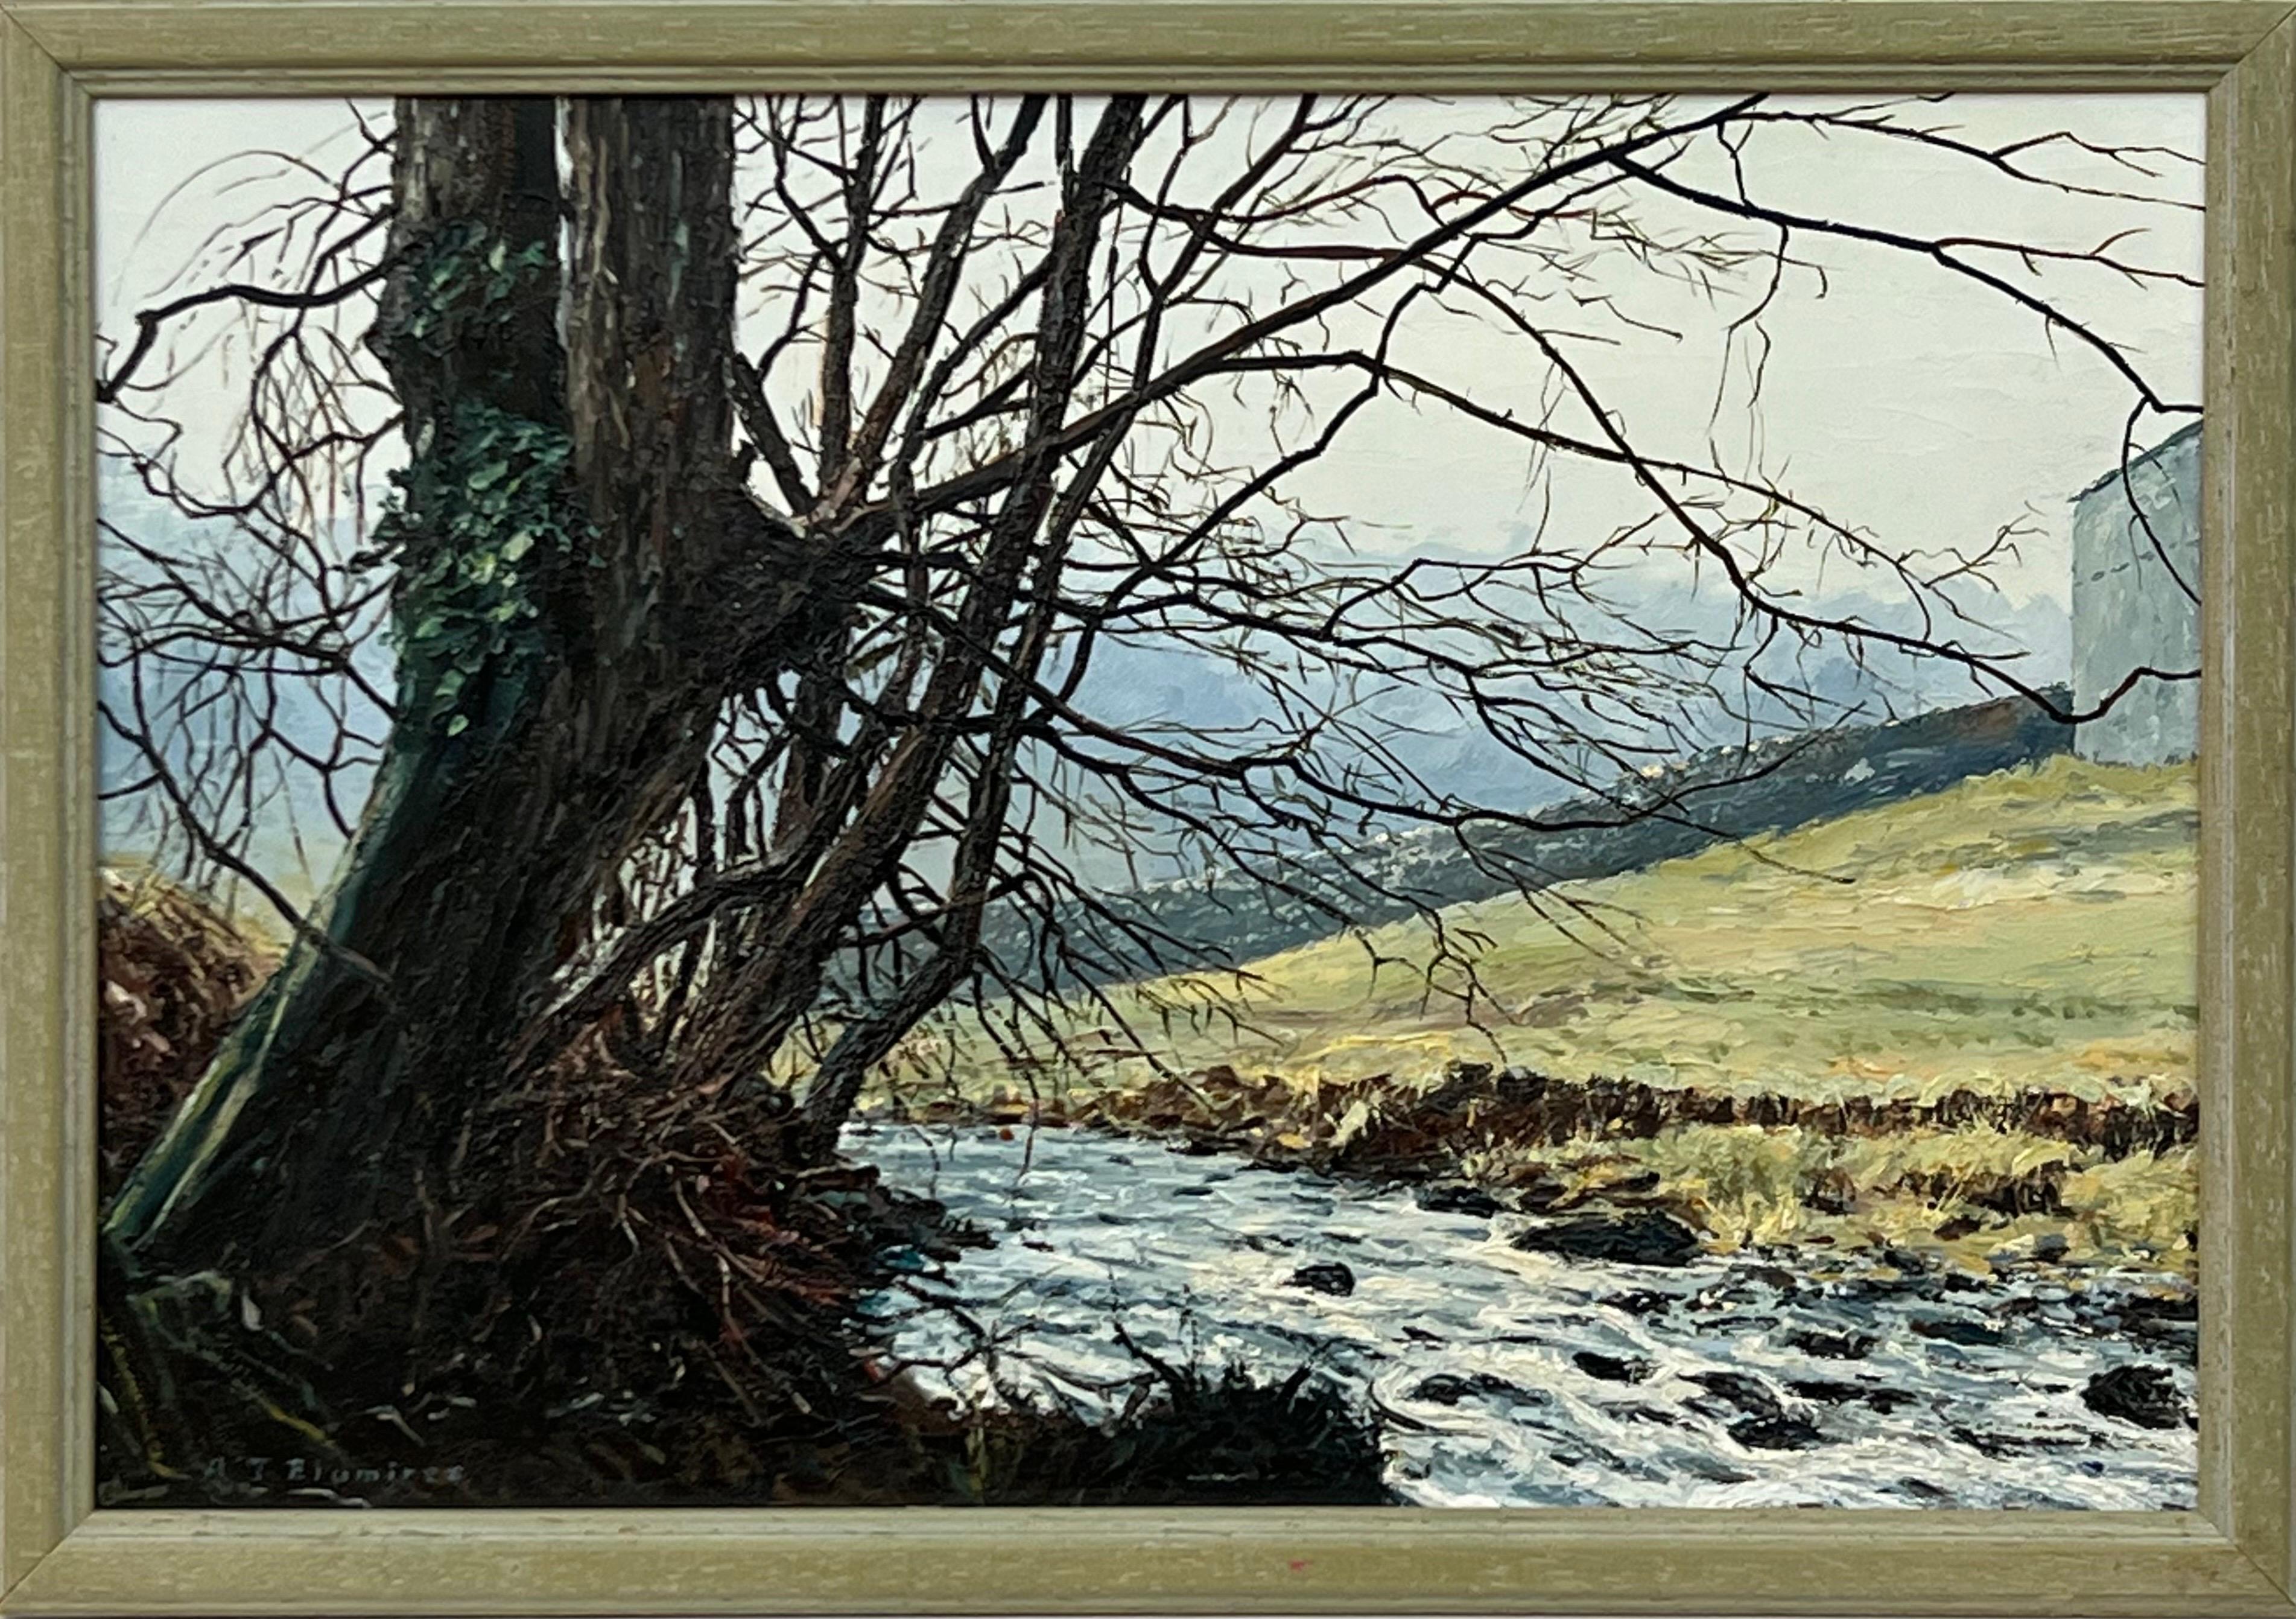 Oil Painting of Tree over a River in Yorkshire Dales by British Landscape Artist - Mixed Media Art by Arthur Terry Blamires